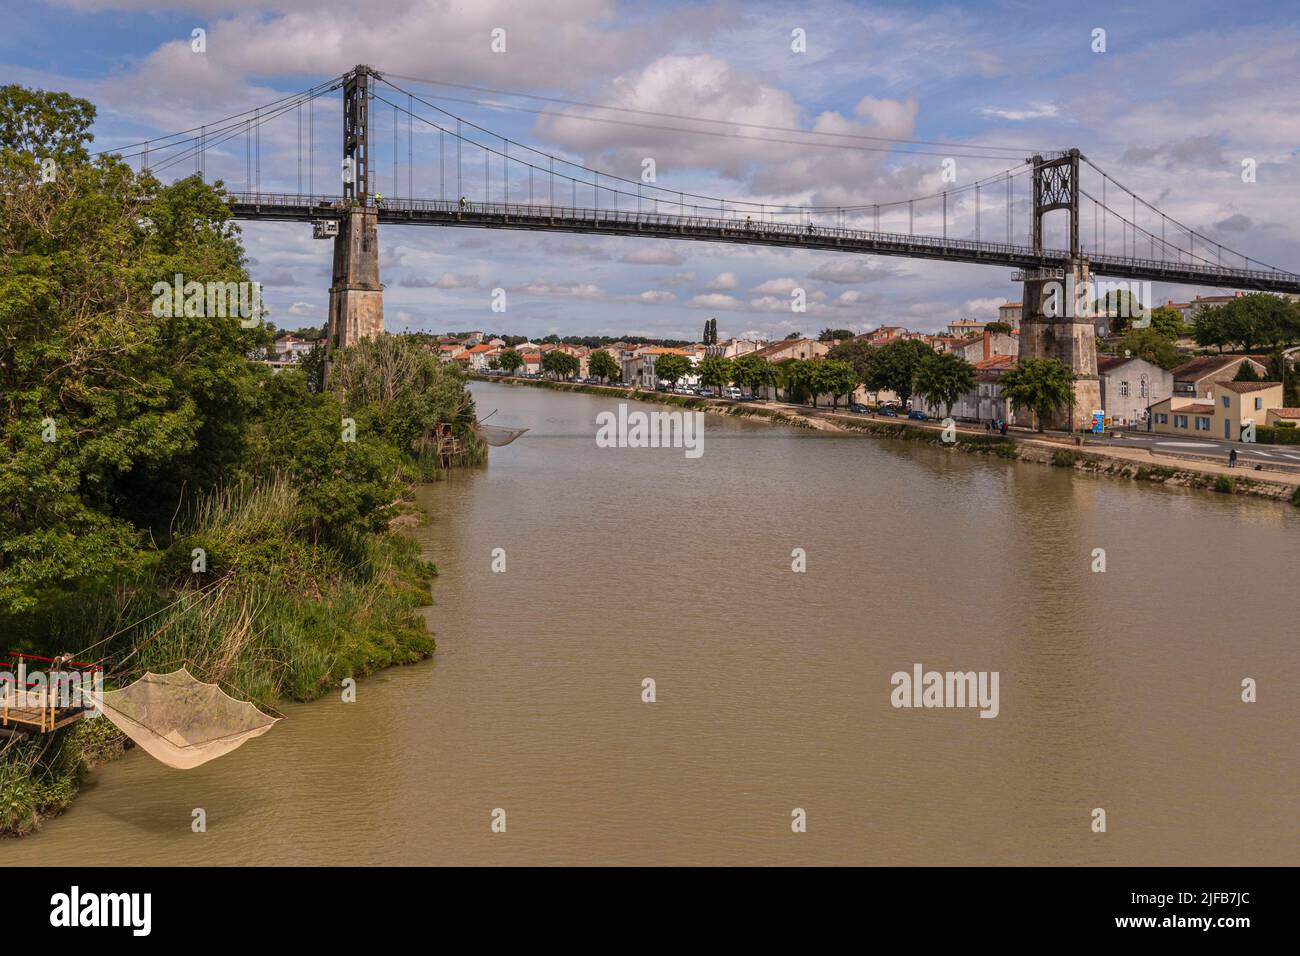 France, Charente-Maritime, Saintonge, Tonnay Charente, the suspension bridge built in 1842 over the Charente river (aerial view) Stock Photo